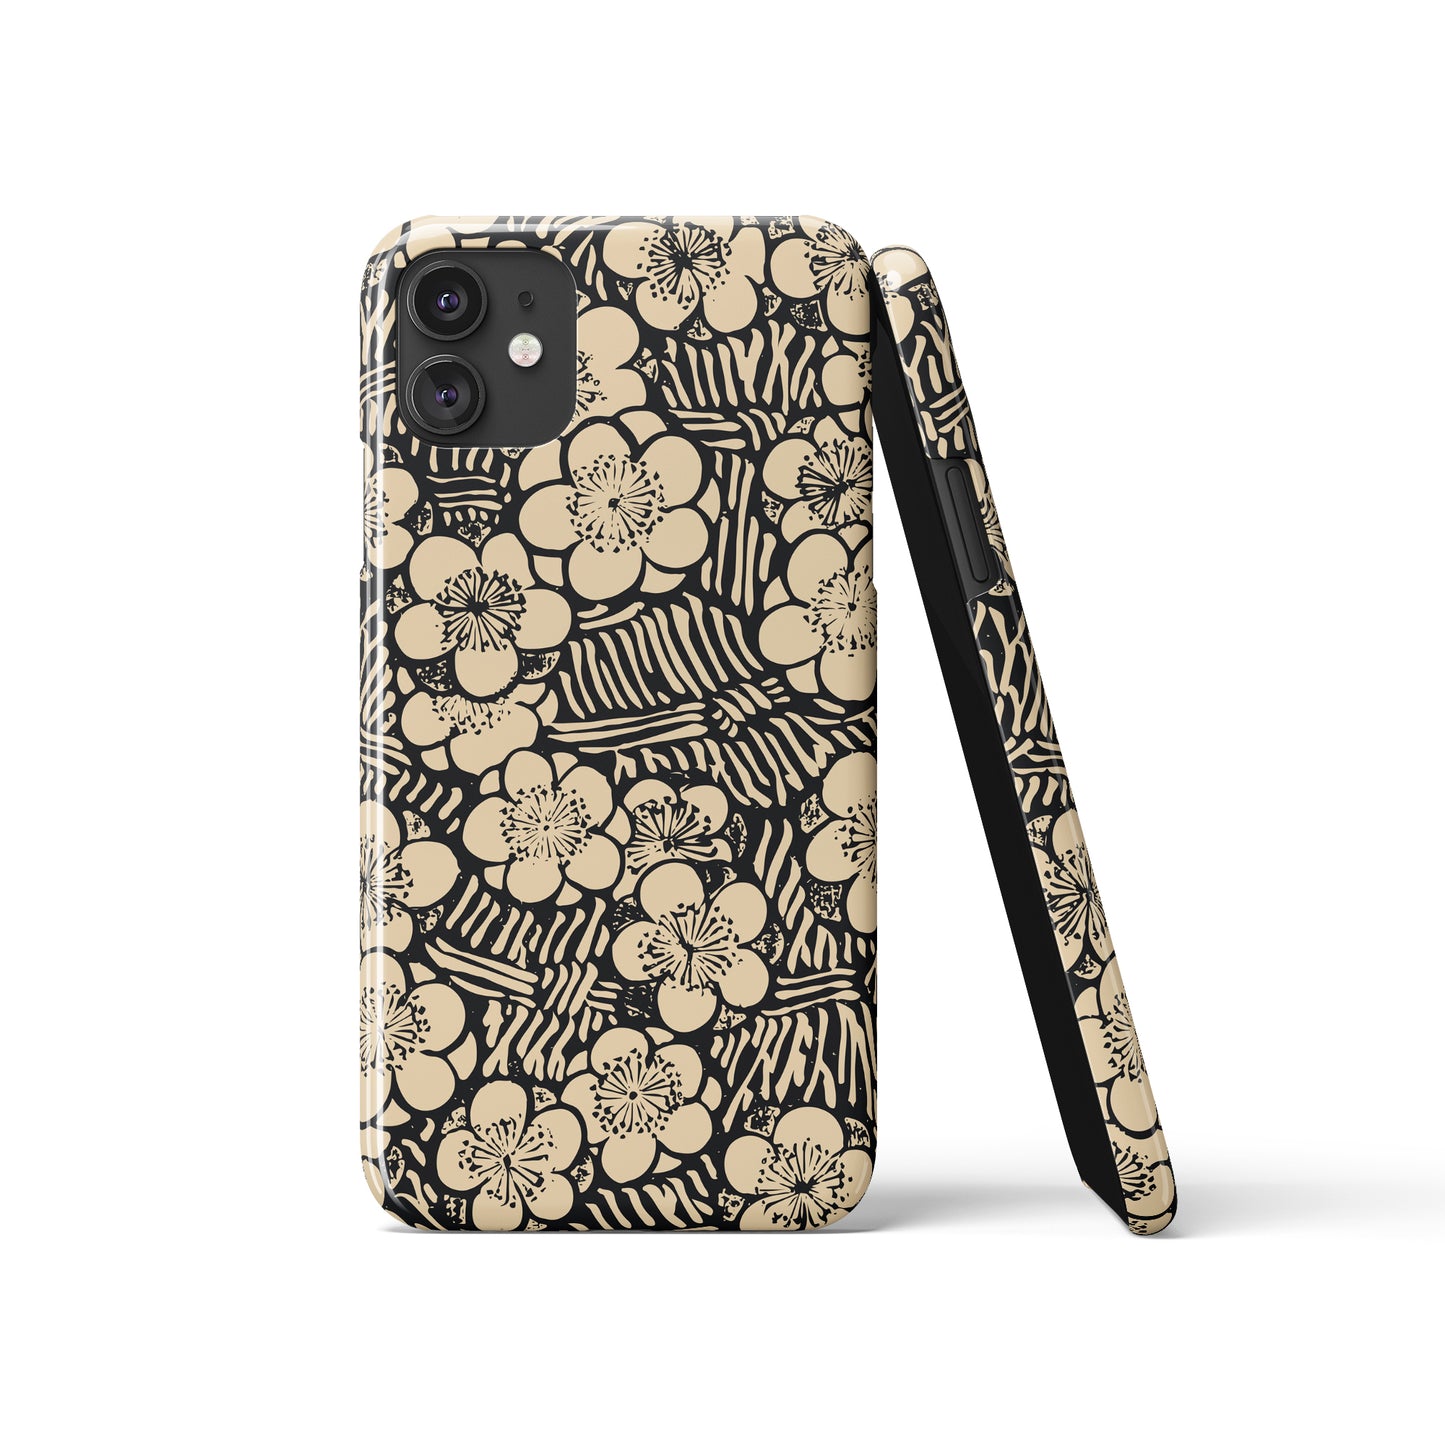 iPhone 12 Case with retro floral print